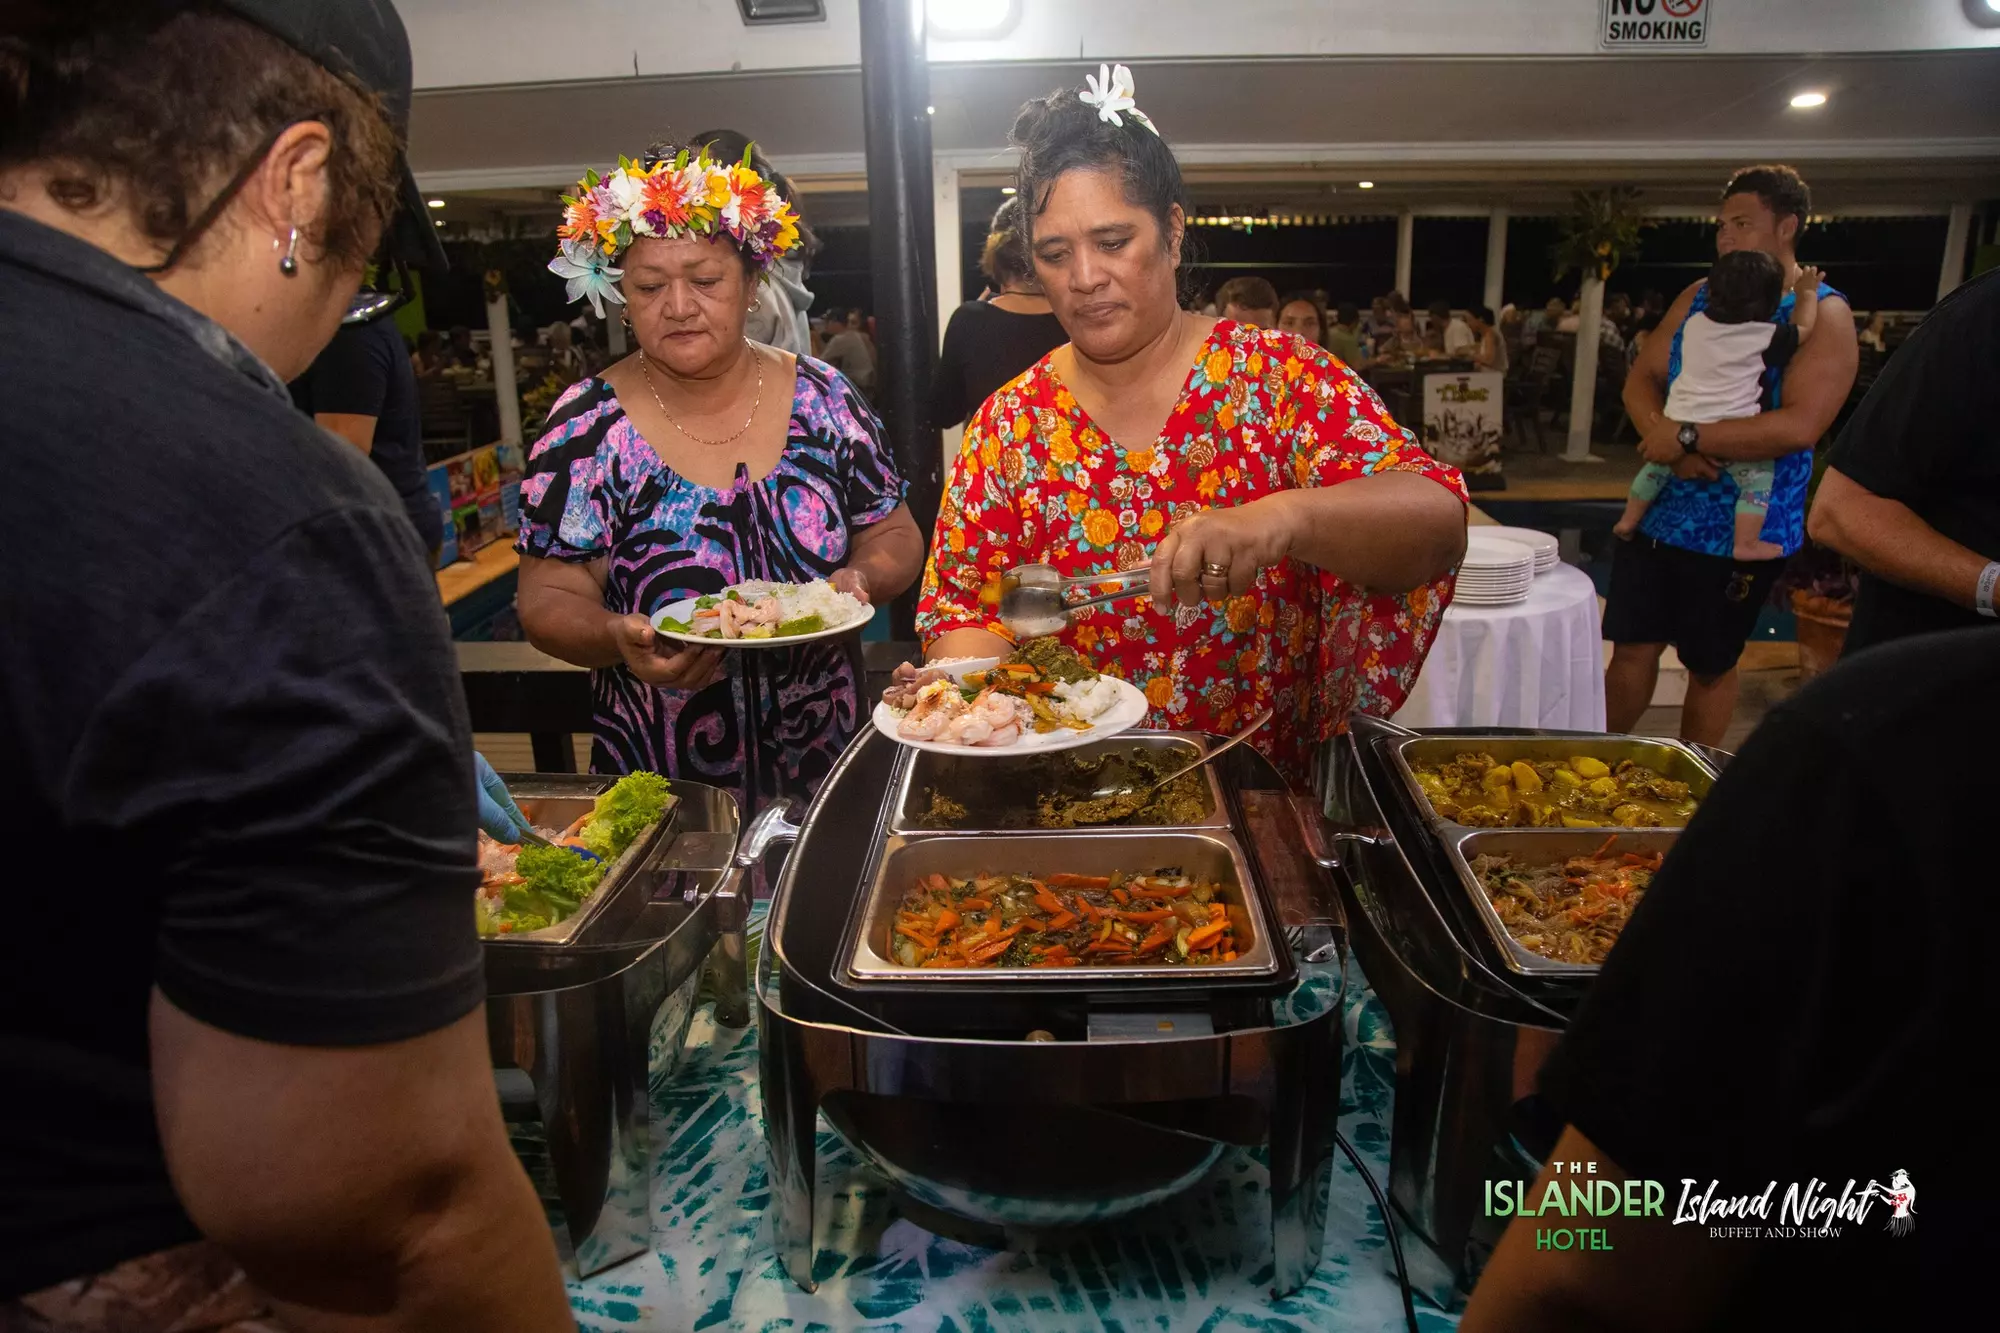 The Islander Hotel Catering 